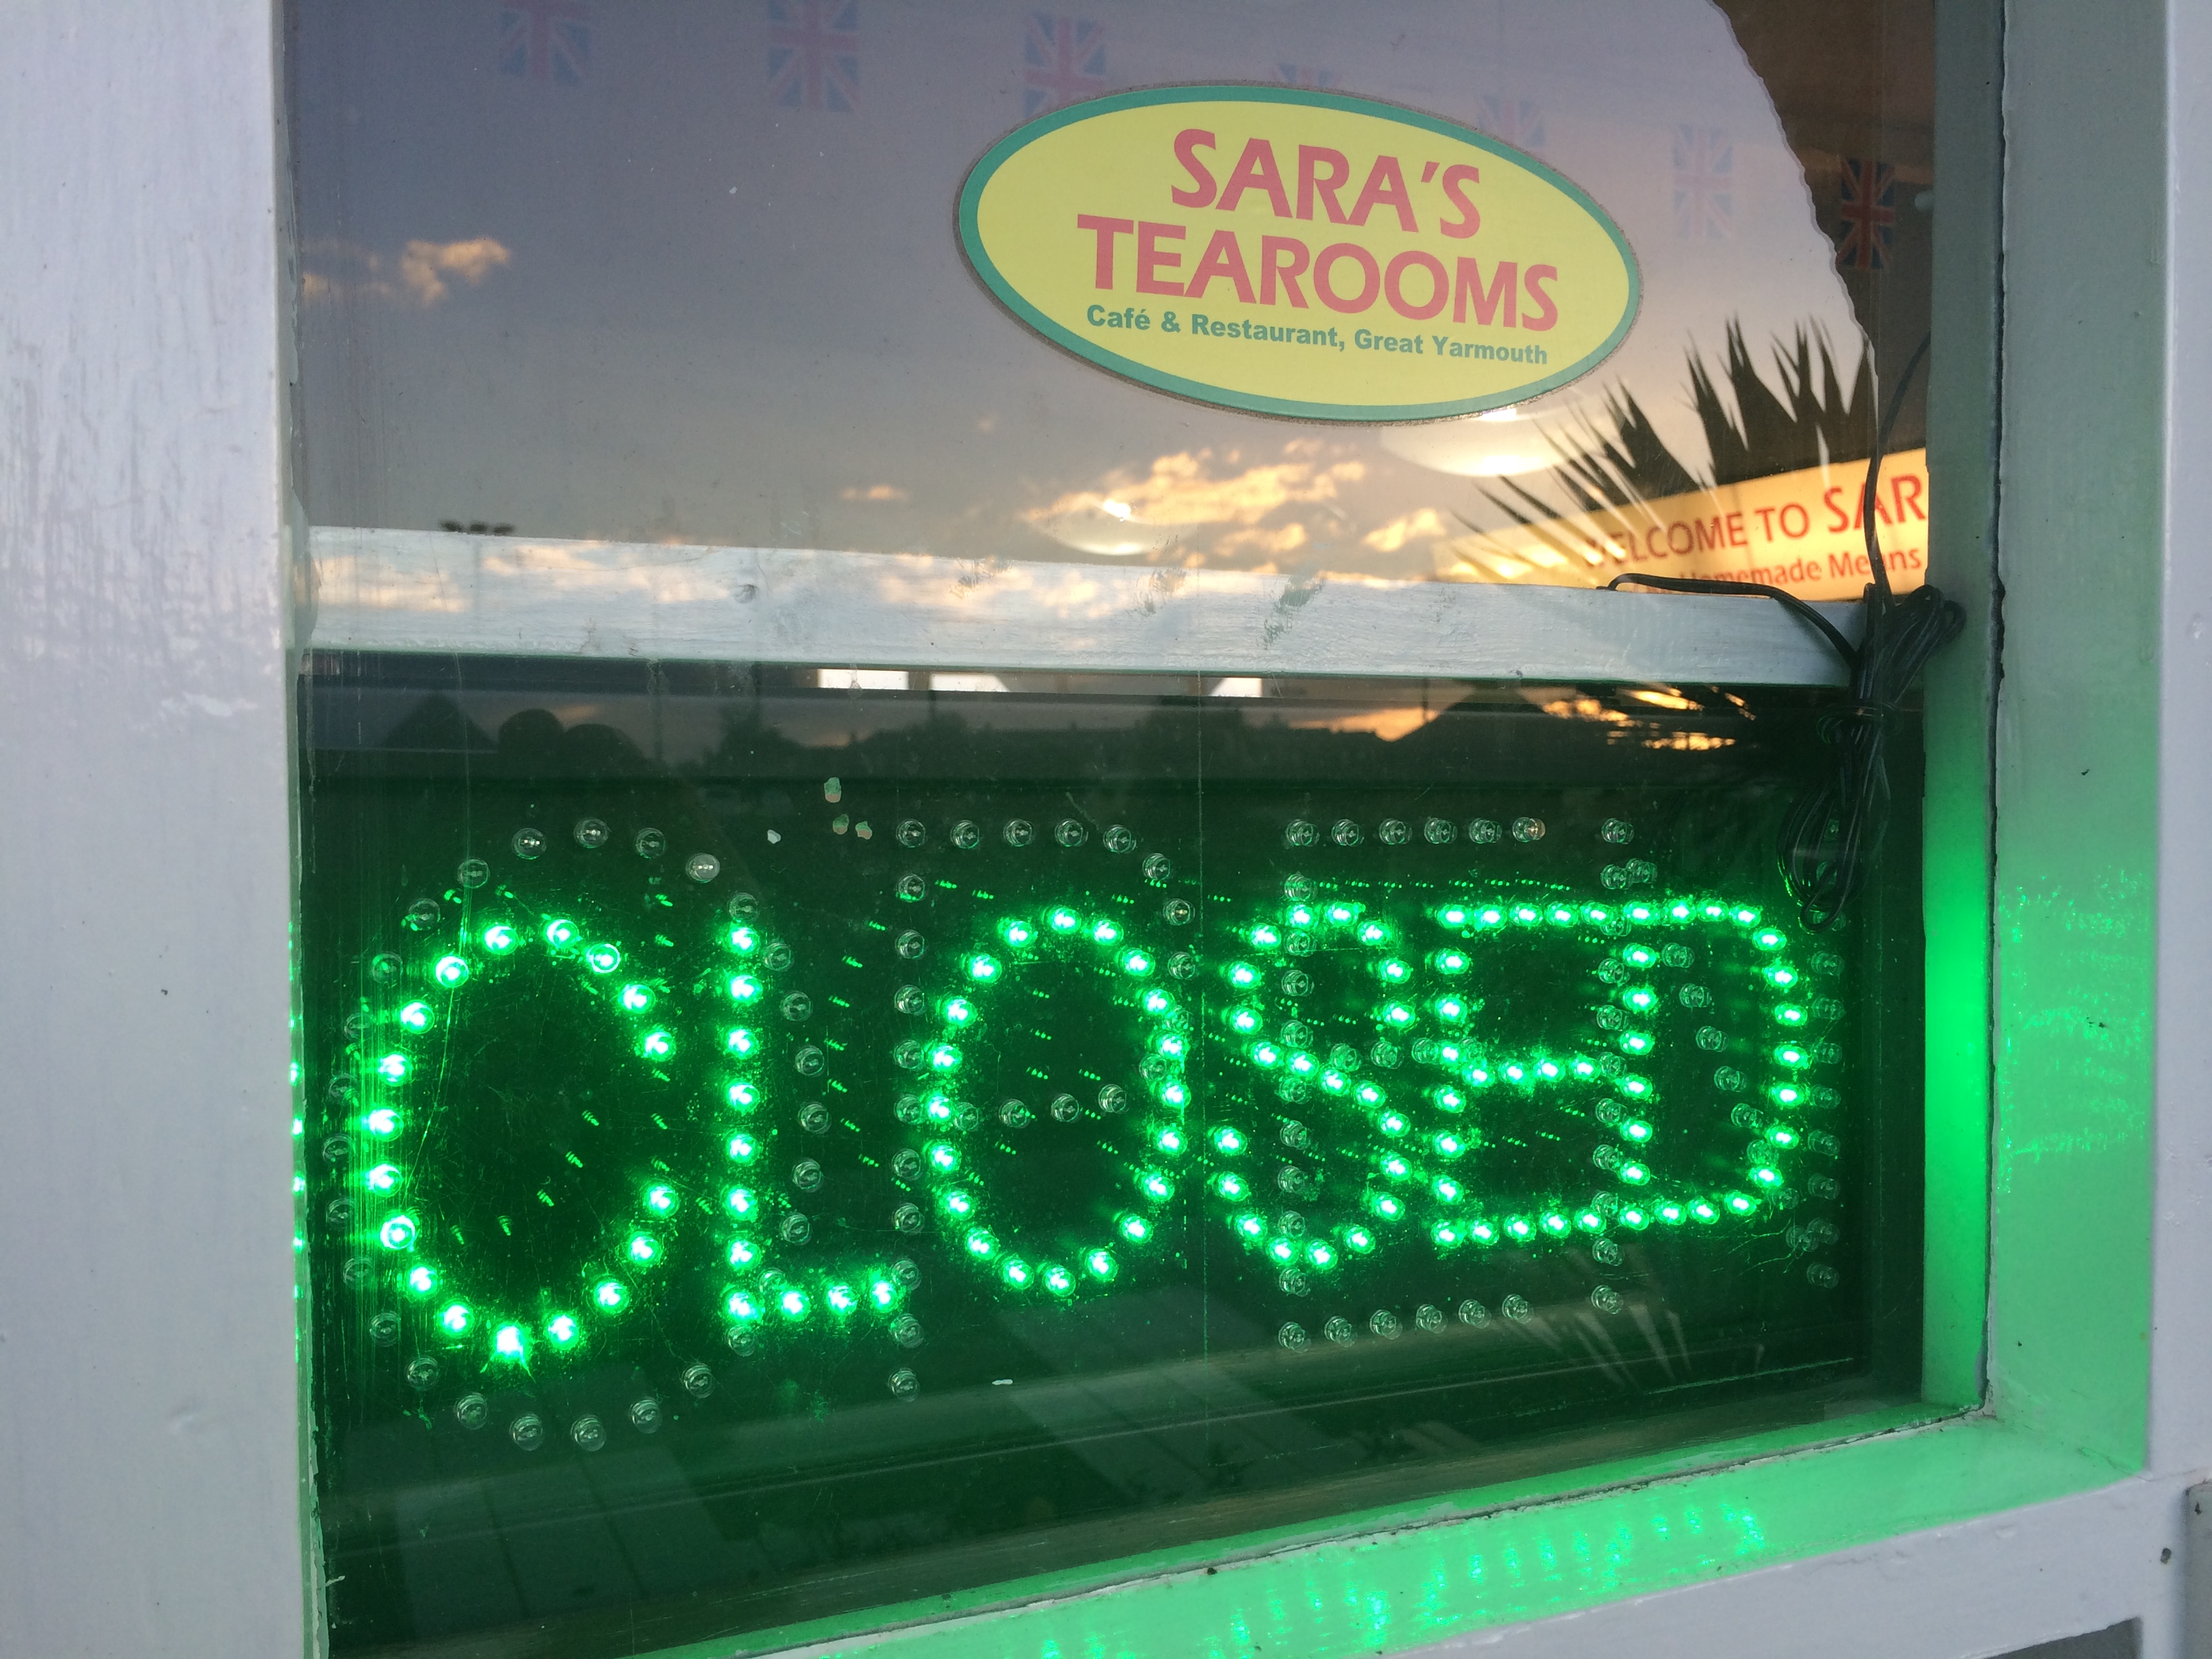 Sara's Tearooms has now Closed for the winter.